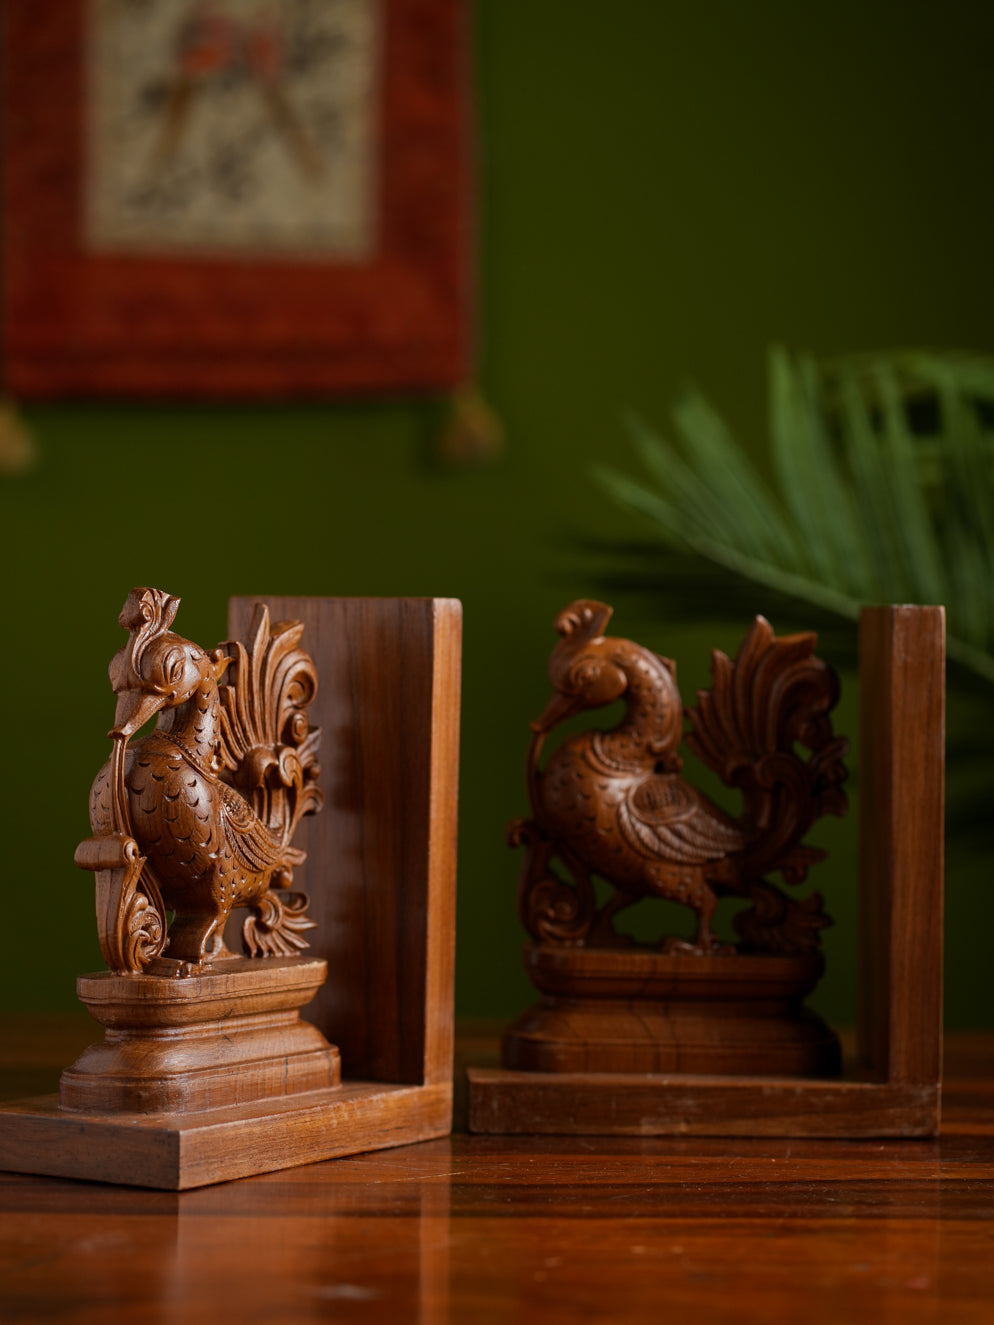 Load image into Gallery viewer, Exclusive Karnataka Wood Carving Book Ends - Hansa (Set of 2)